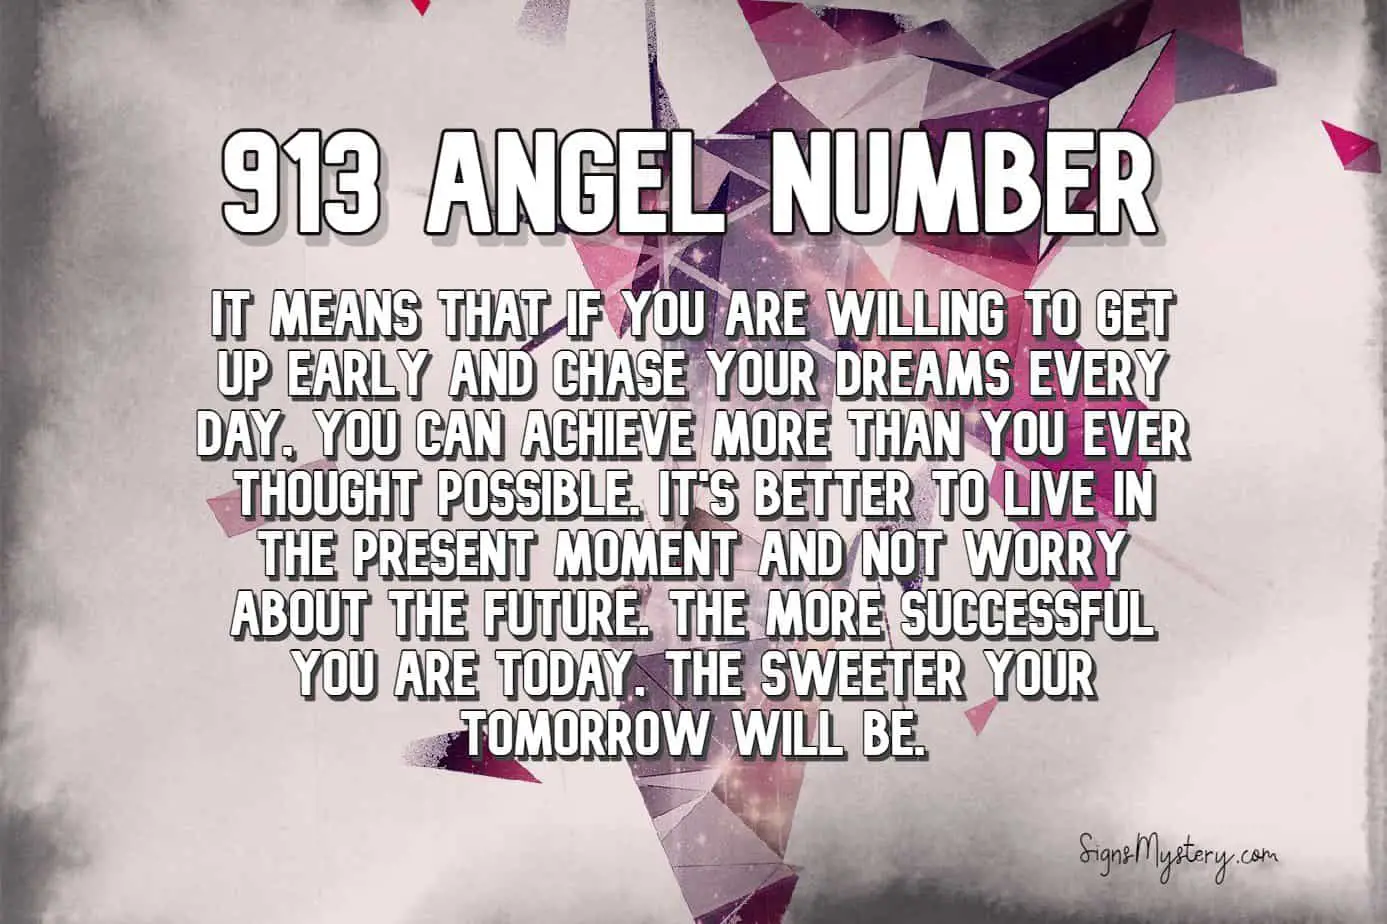 913 Angel Number: Meaning and Symbolism